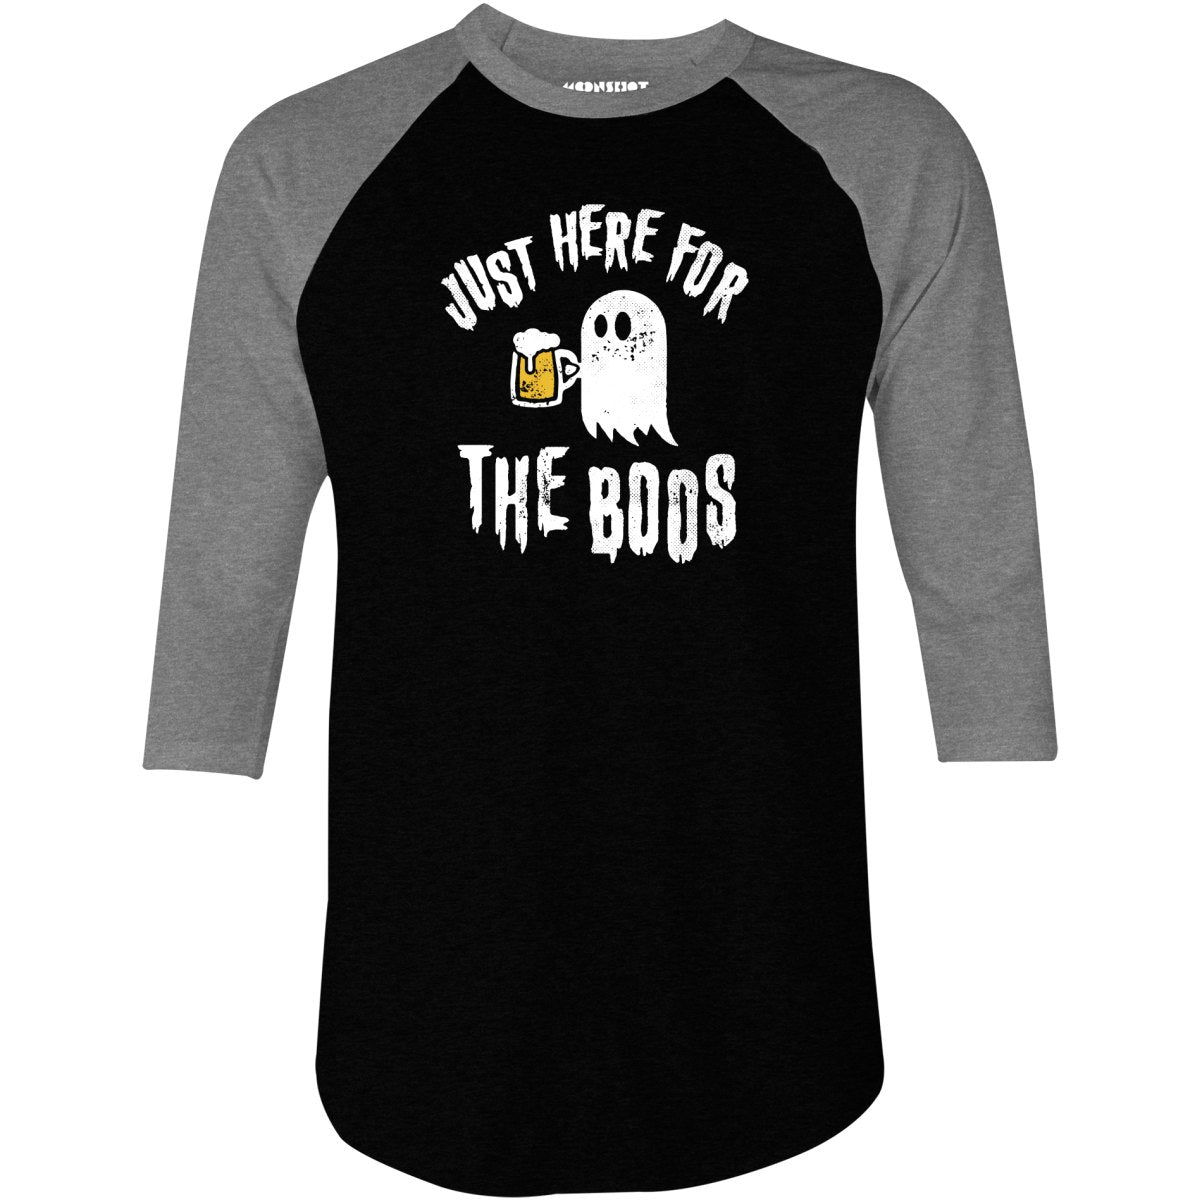 Just Here for the Boos - 3/4 Sleeve Raglan T-Shirt